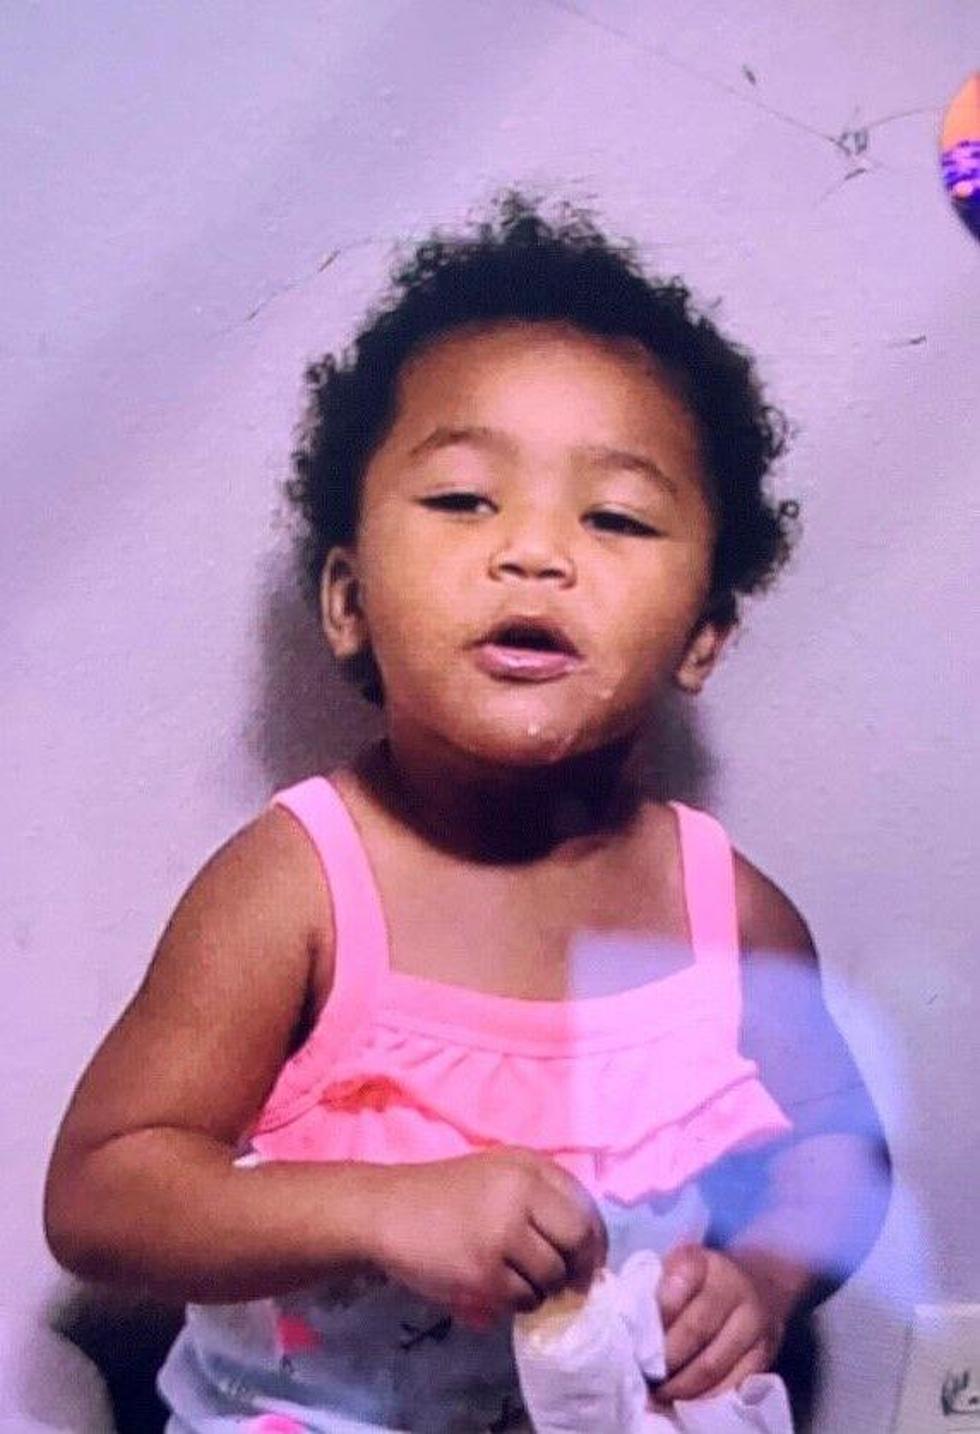 Tragic Ending to Story of Missing Toddler in Baton Rouge